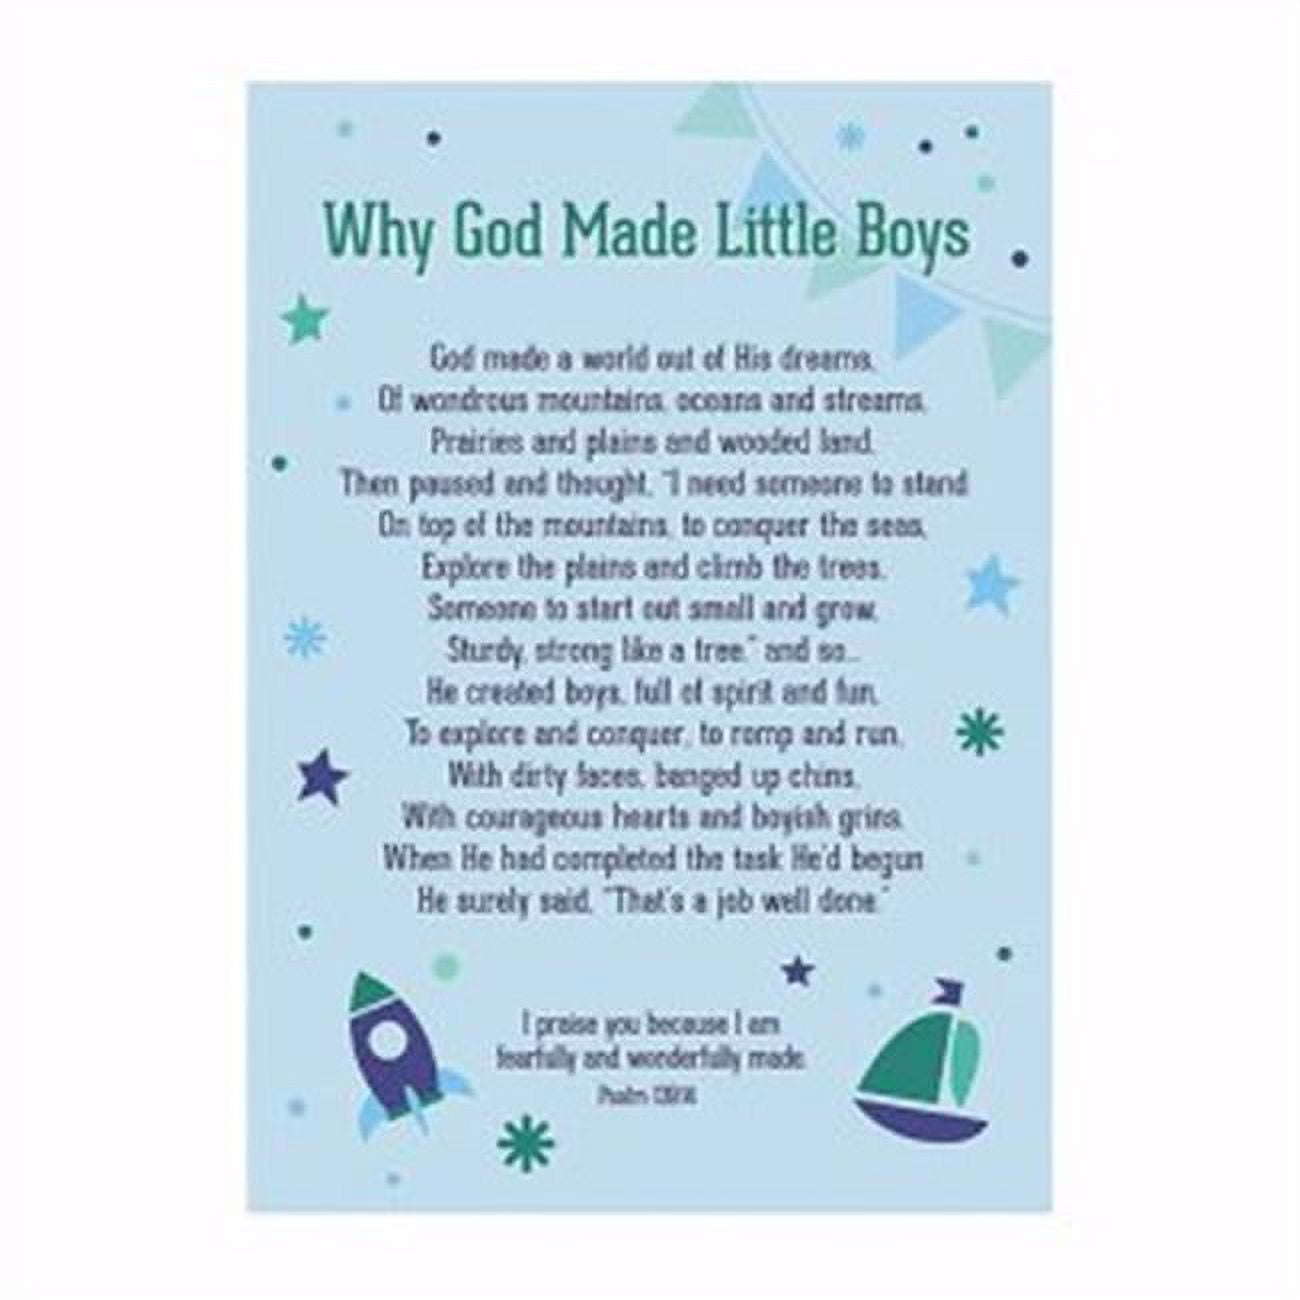 163866 13.5 X 19 In. Poster Large - Why God Made Little Boys